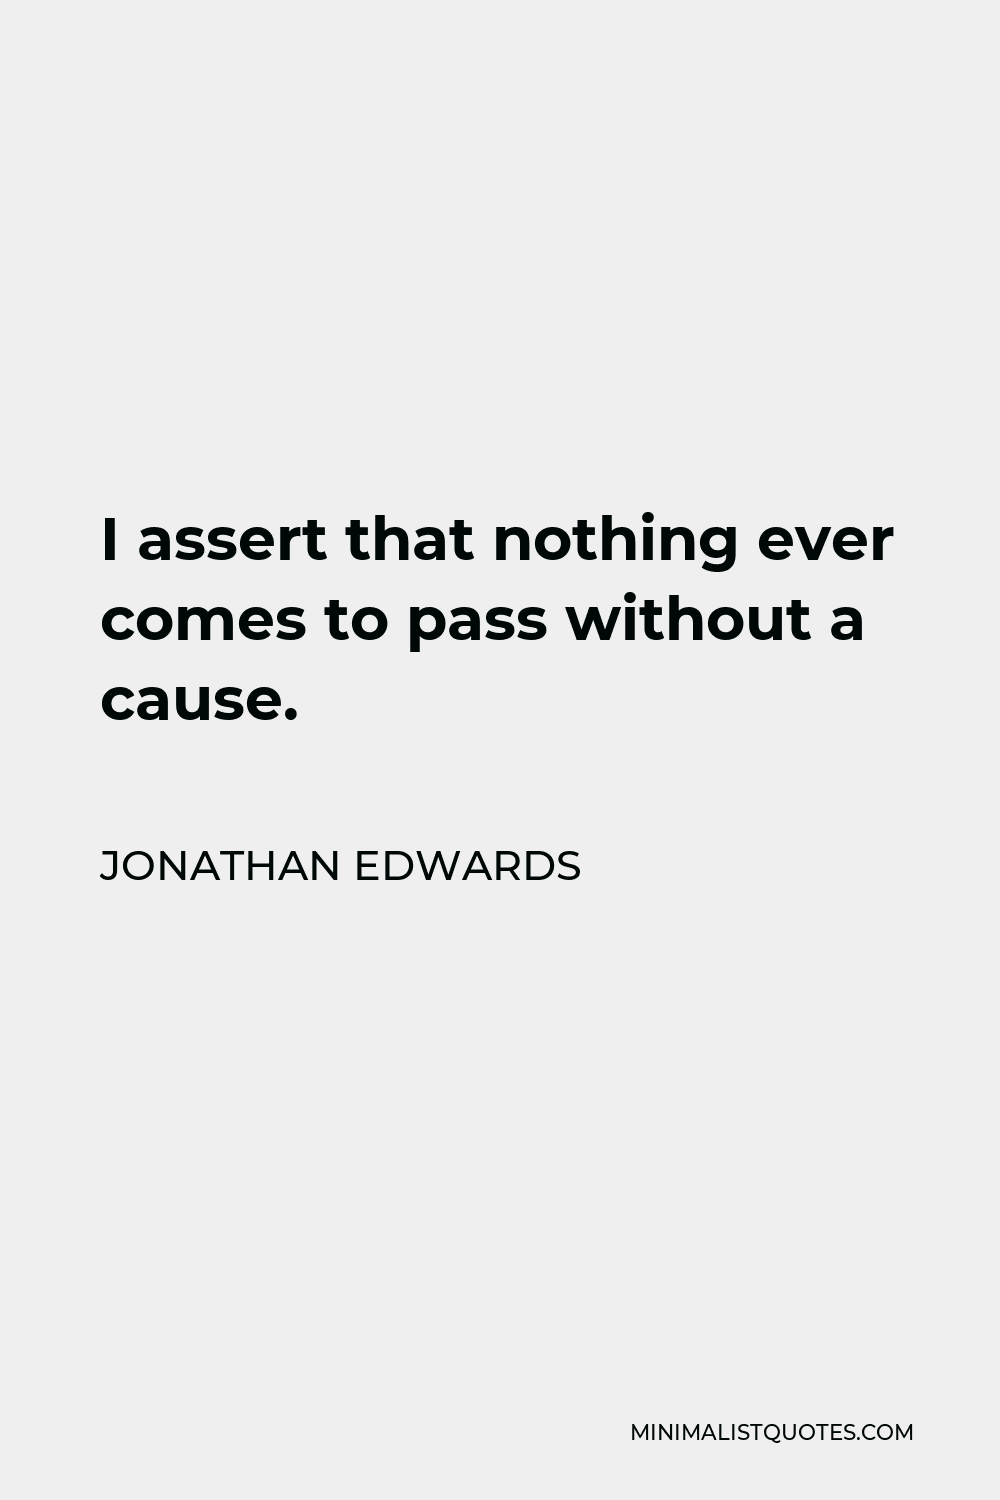 Jonathan Edwards Quote - I assert that nothing ever comes to pass without a cause.